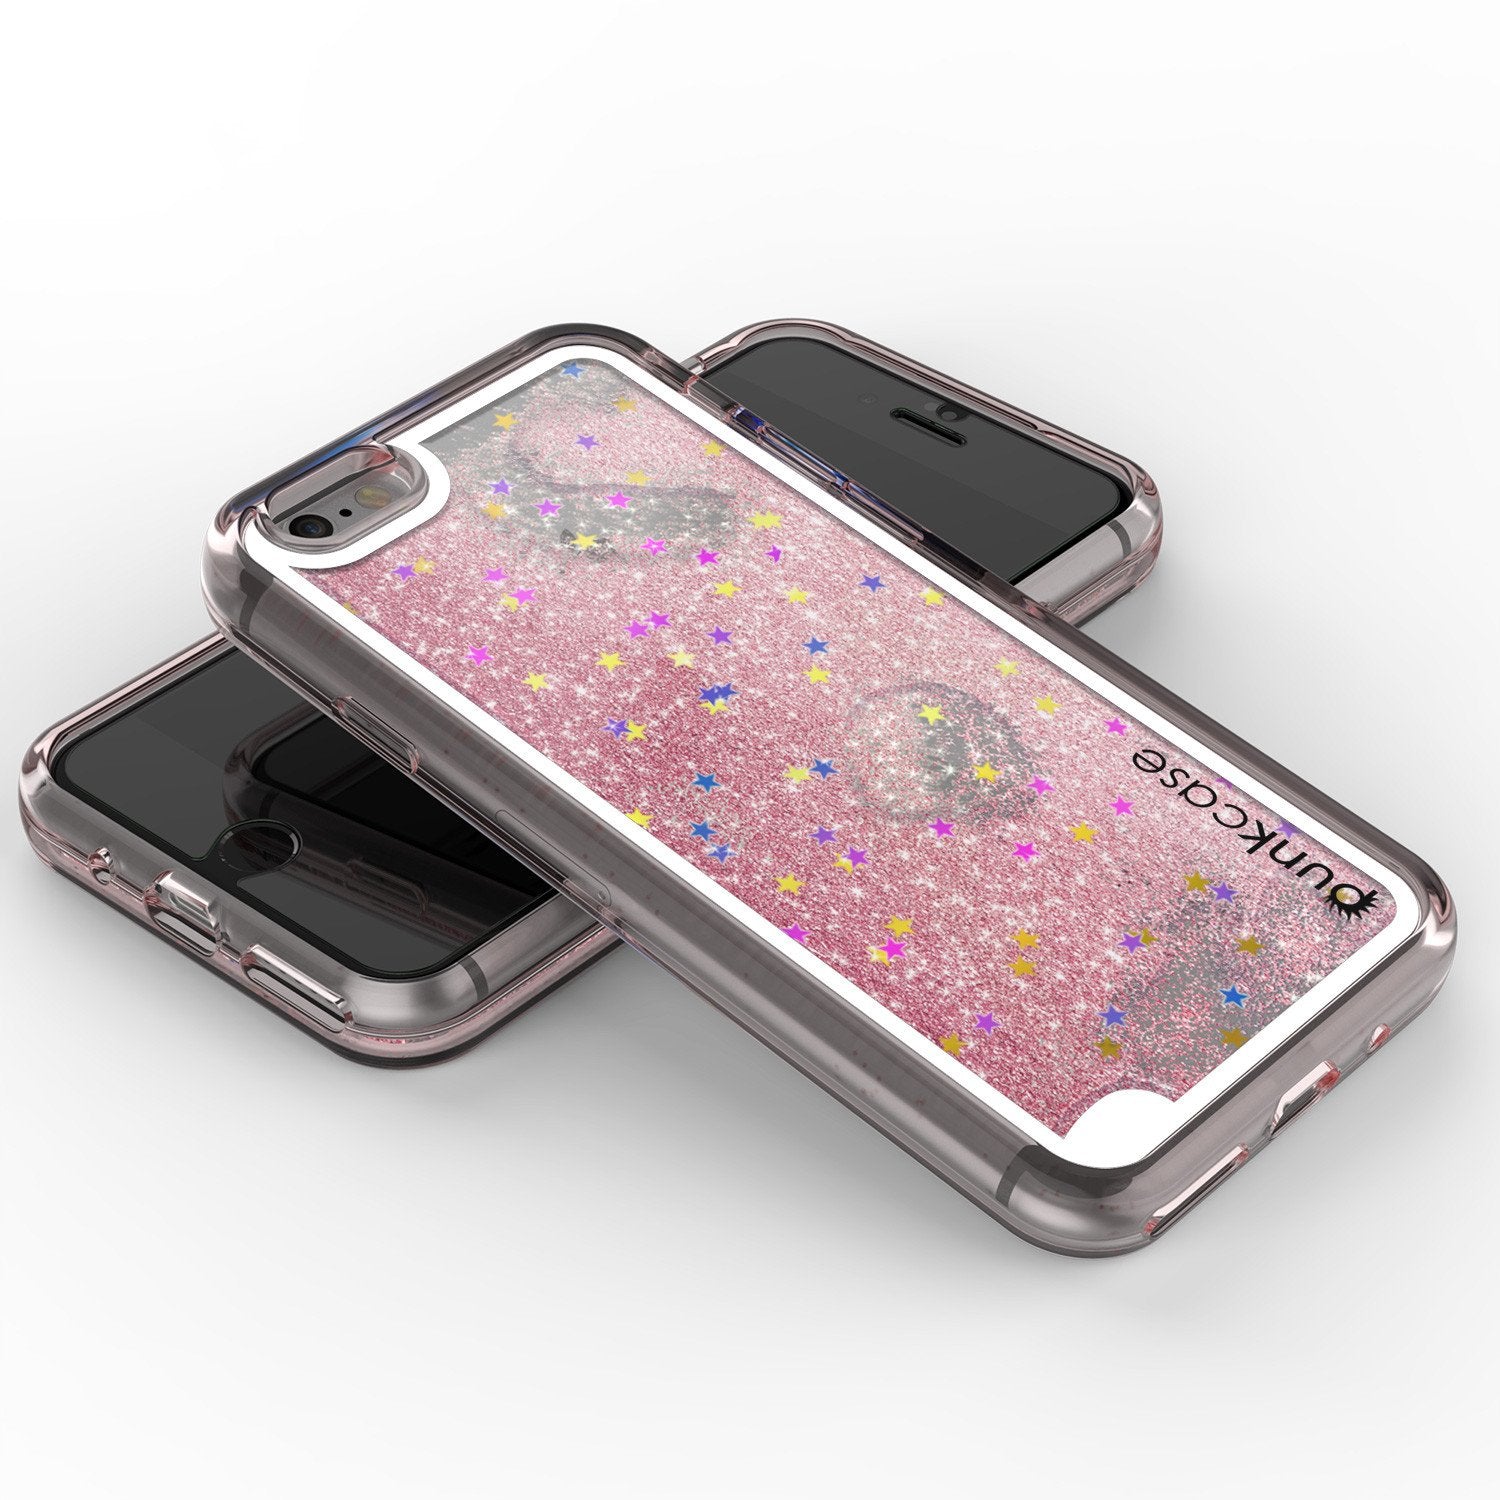 iPhone 7 Case, PunkCase LIQUID Rose Series, Protective Dual Layer Floating Glitter Cover - PunkCase NZ